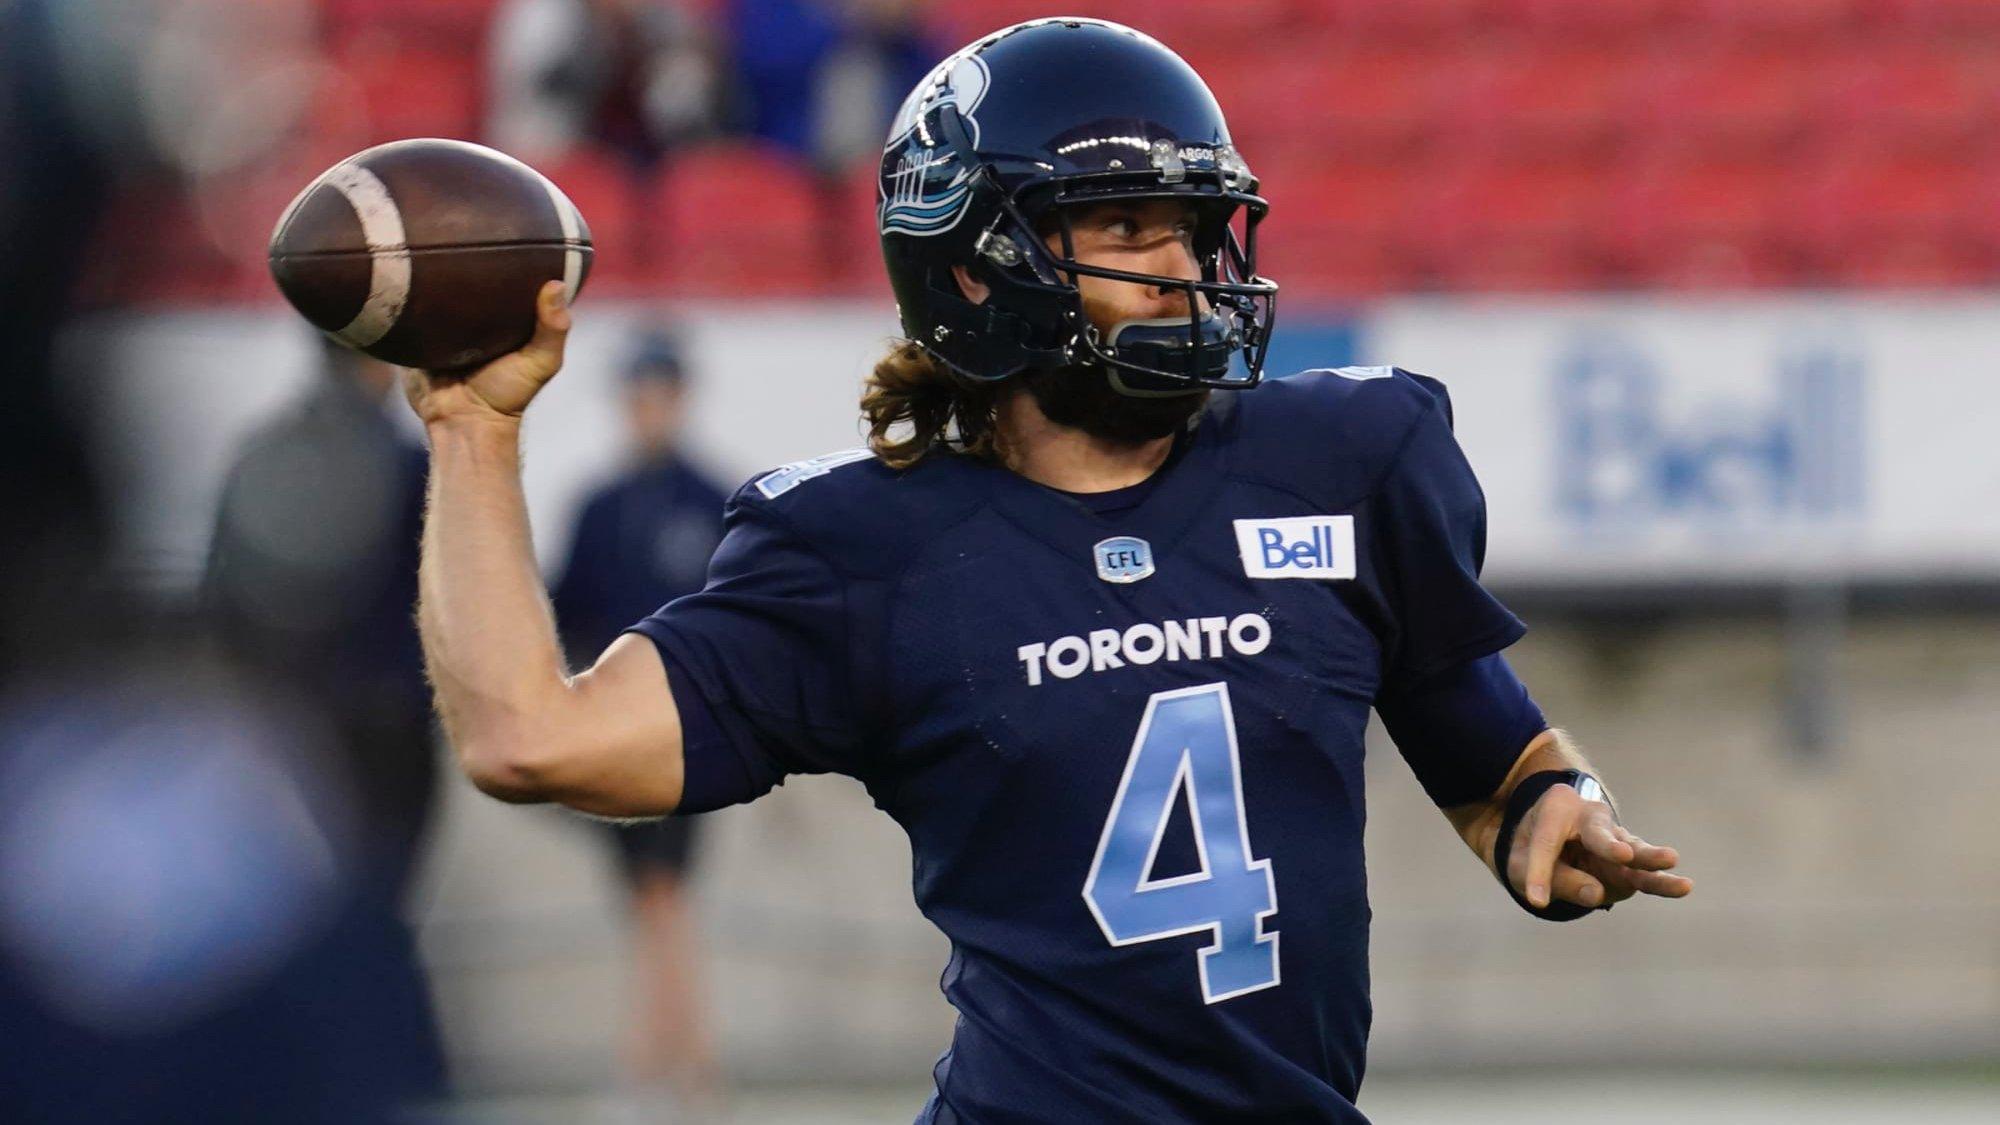 CFL Week 2 Betting: Can the Argos Beat the Alouettes to Open the Season?